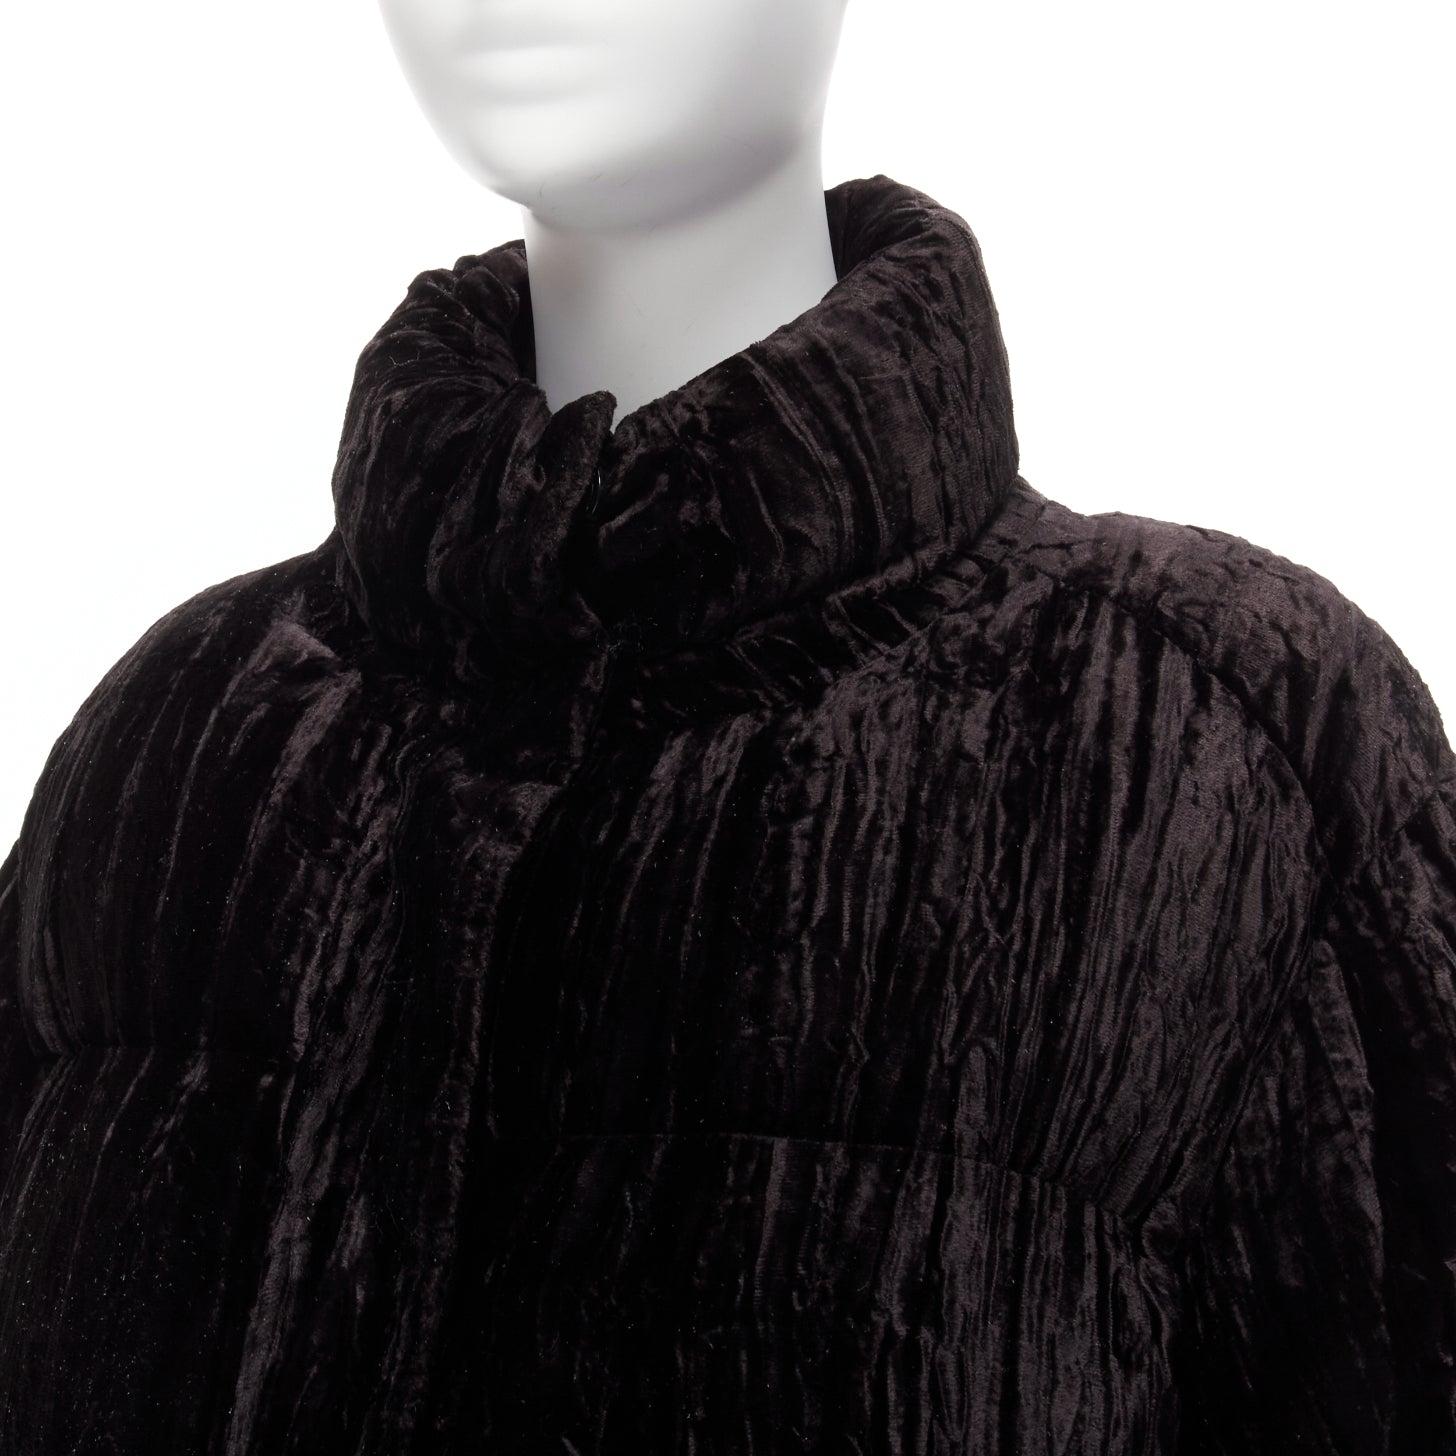 ANAIS JOURDEN black crimped velvet high neck puffer coat jacket FR38 M
Reference: BSHW/A00002
Brand: Anais Jourden
Material: Wool, Blend
Color: Black
Pattern: Solid
Closure: Snap Buttons
Lining: Black Fabric
Made in: China

CONDITION:
Condition: